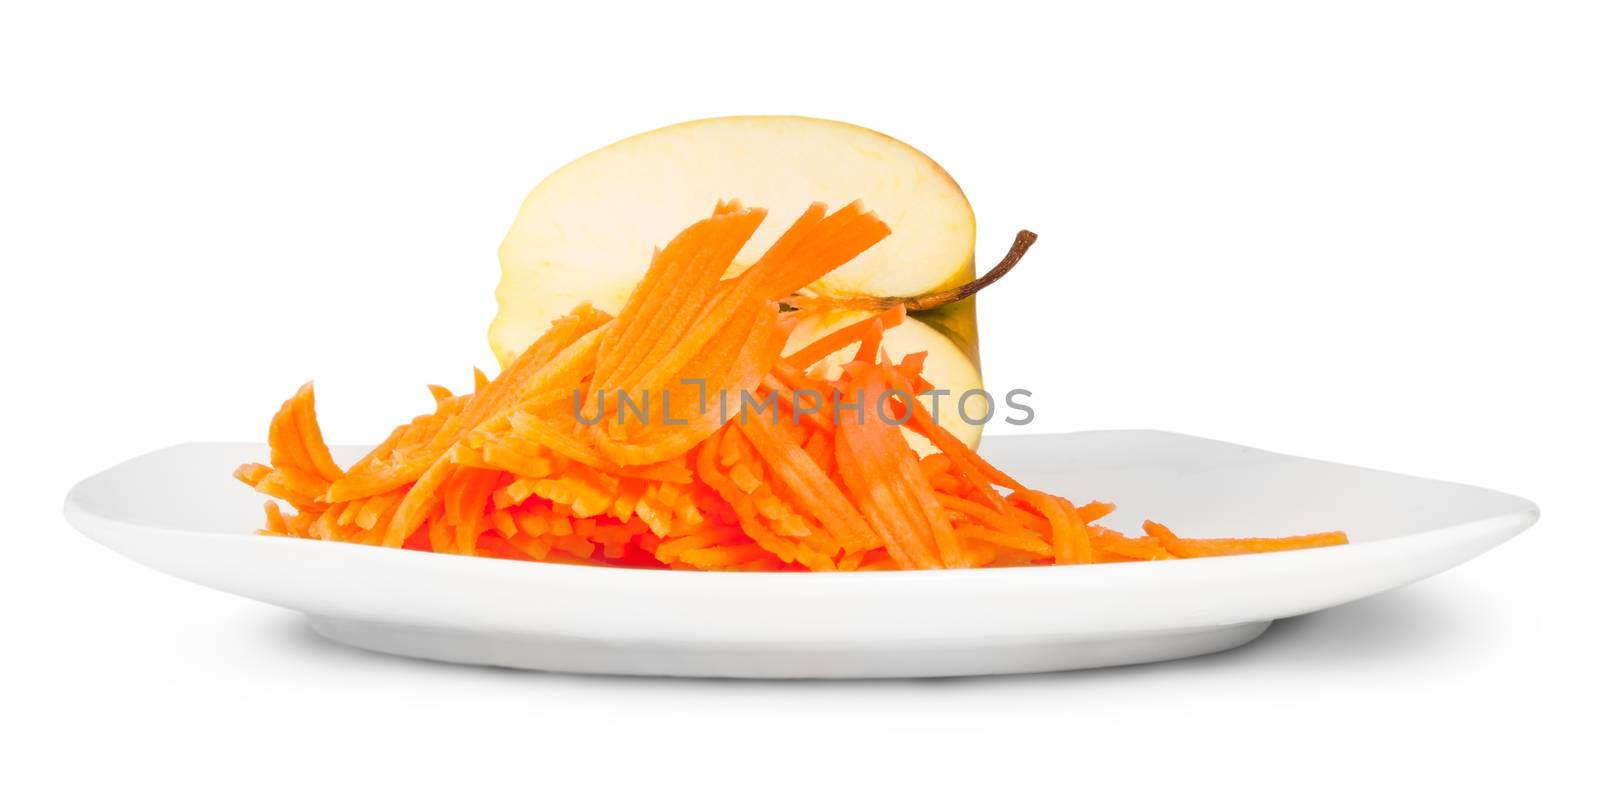 Half An Apple With Grated Carrot On White Plate Isolated On White Background